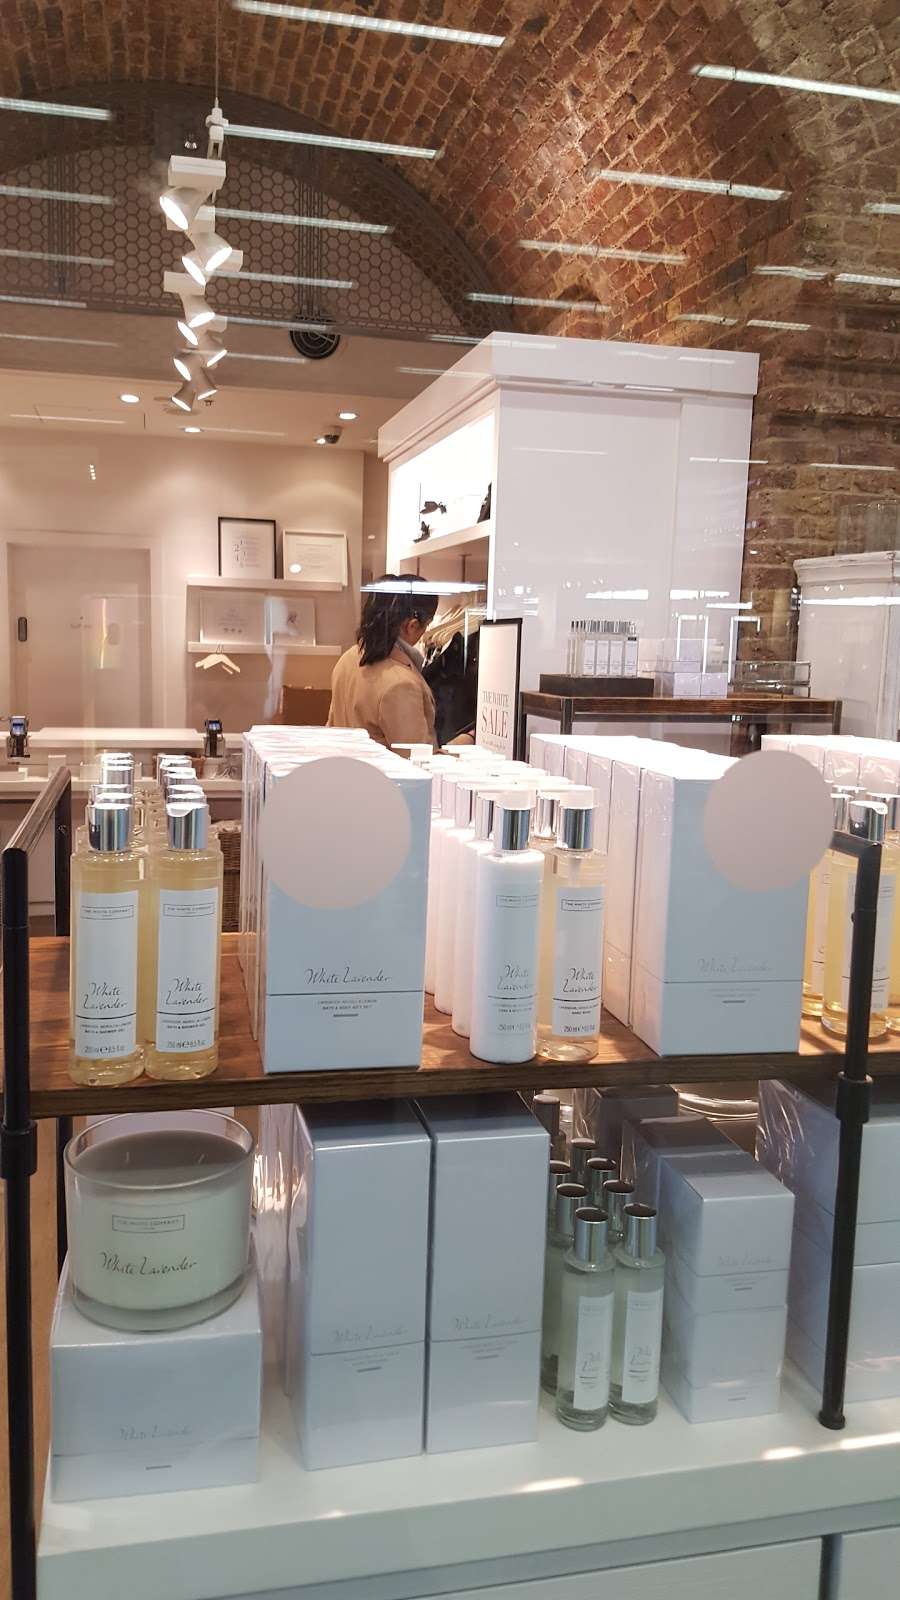 The White Company | The Arcade, Lower Concourse, St Pancras International Station, Pancras Rd, Kings Cross, London NW1 2QP, UK | Phone: 020 3589 0525